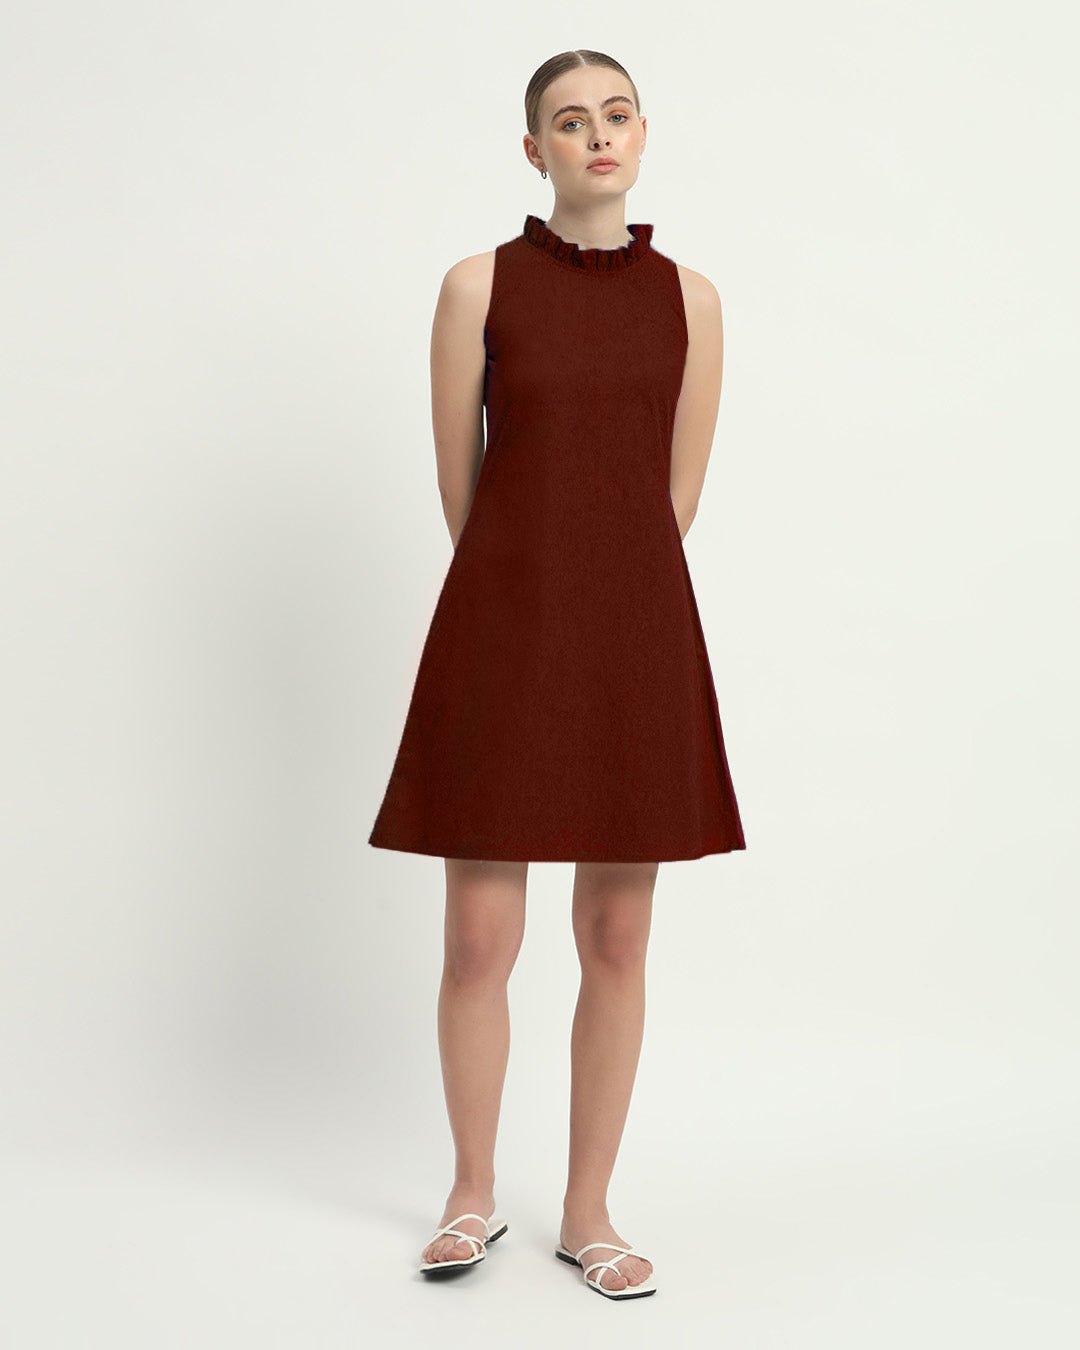 The Angelica Rouge Cotton Dress